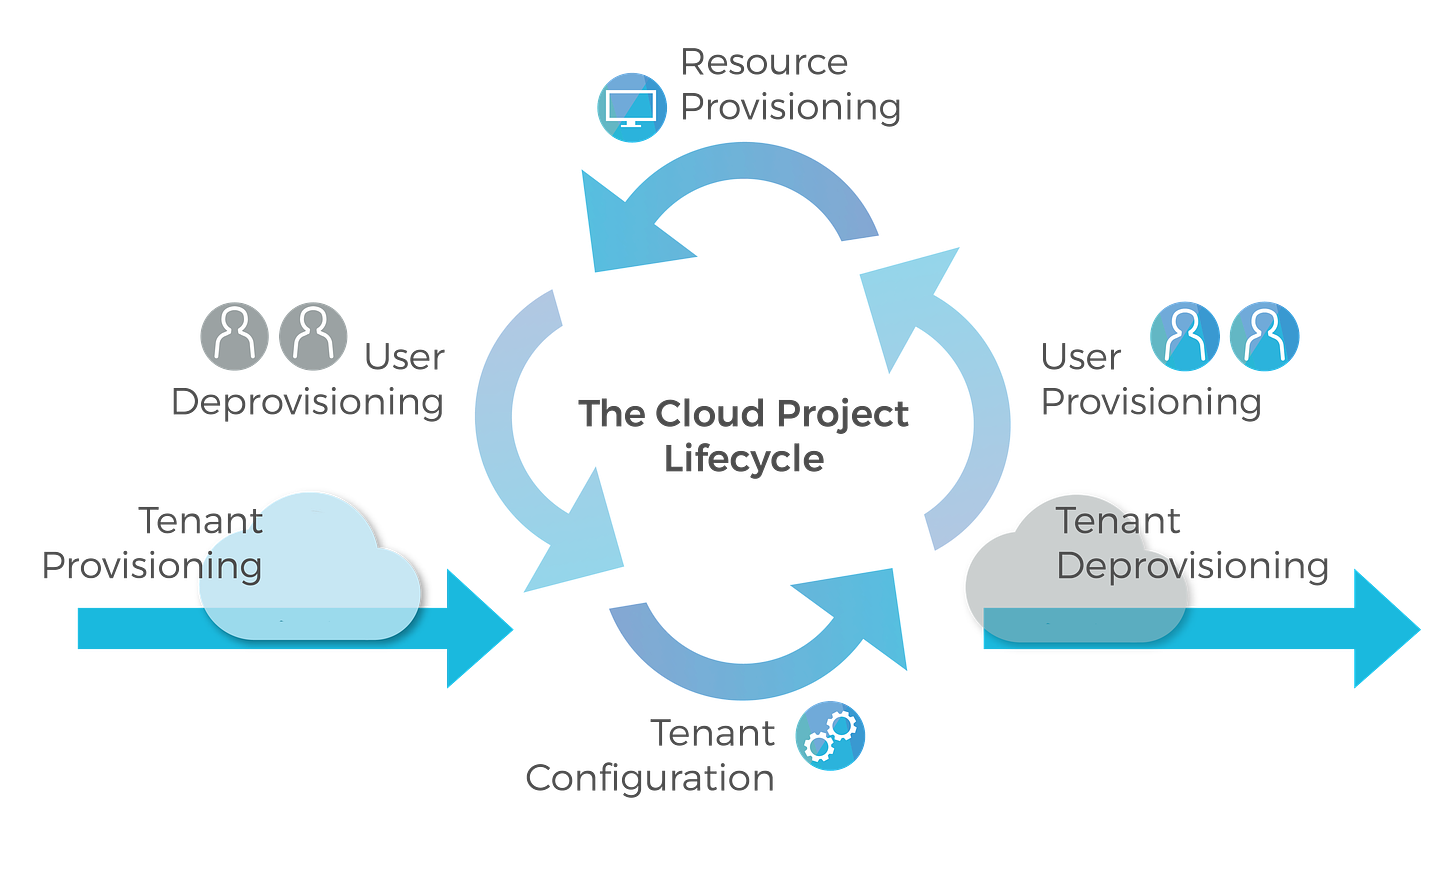 The Cloud Project Lifecycle